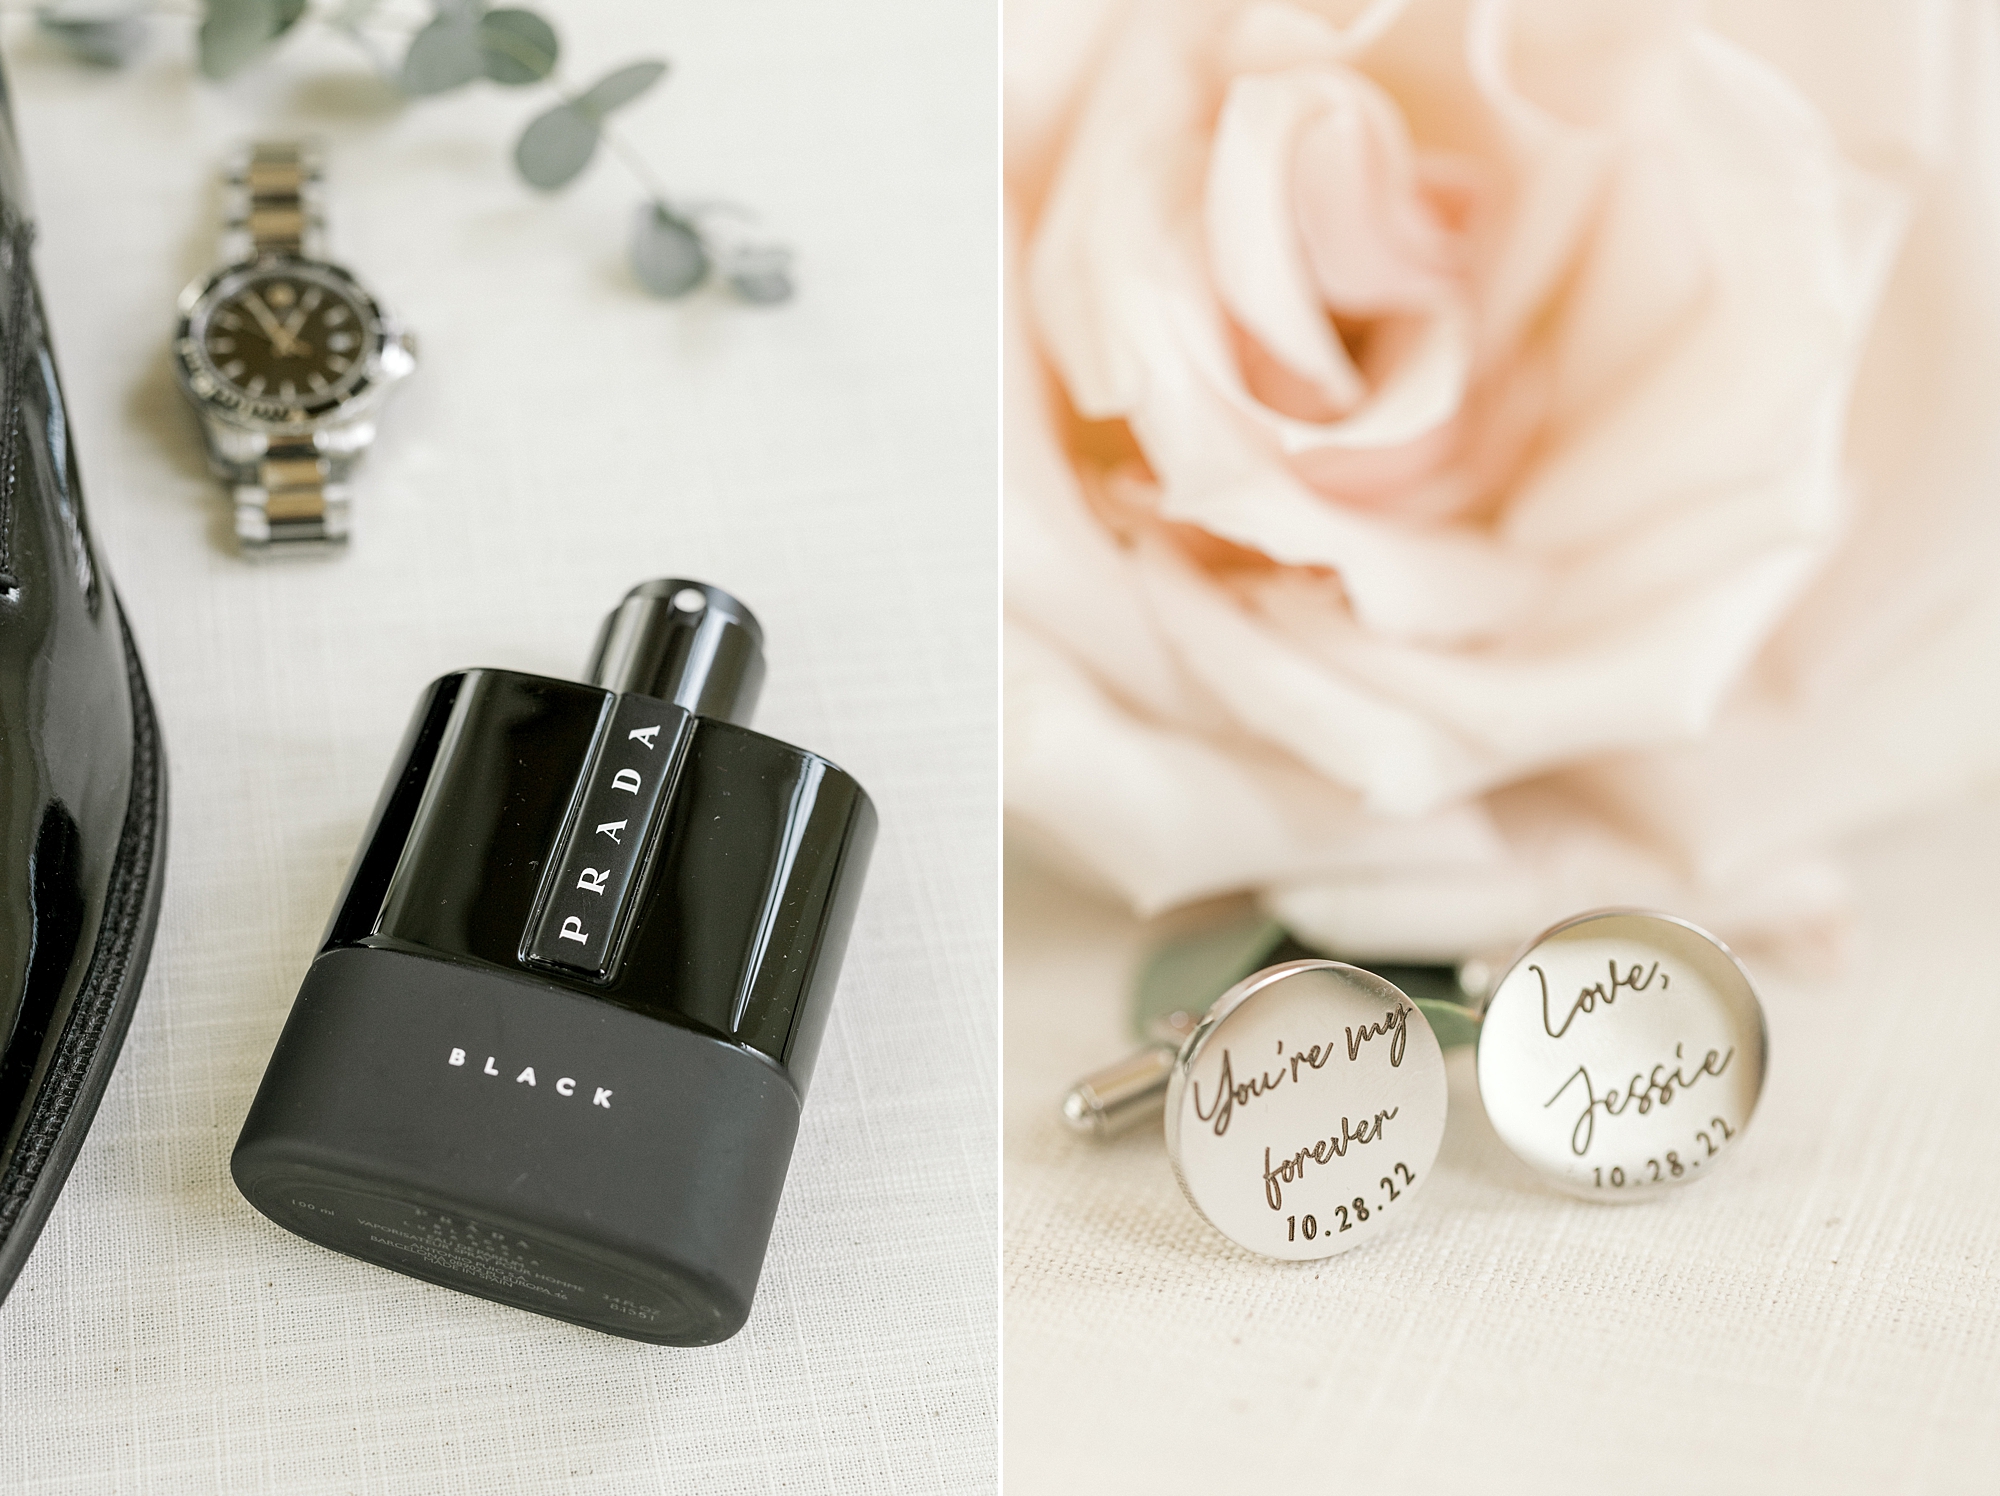 cufflinks with bride's writing on them and groom's cologne